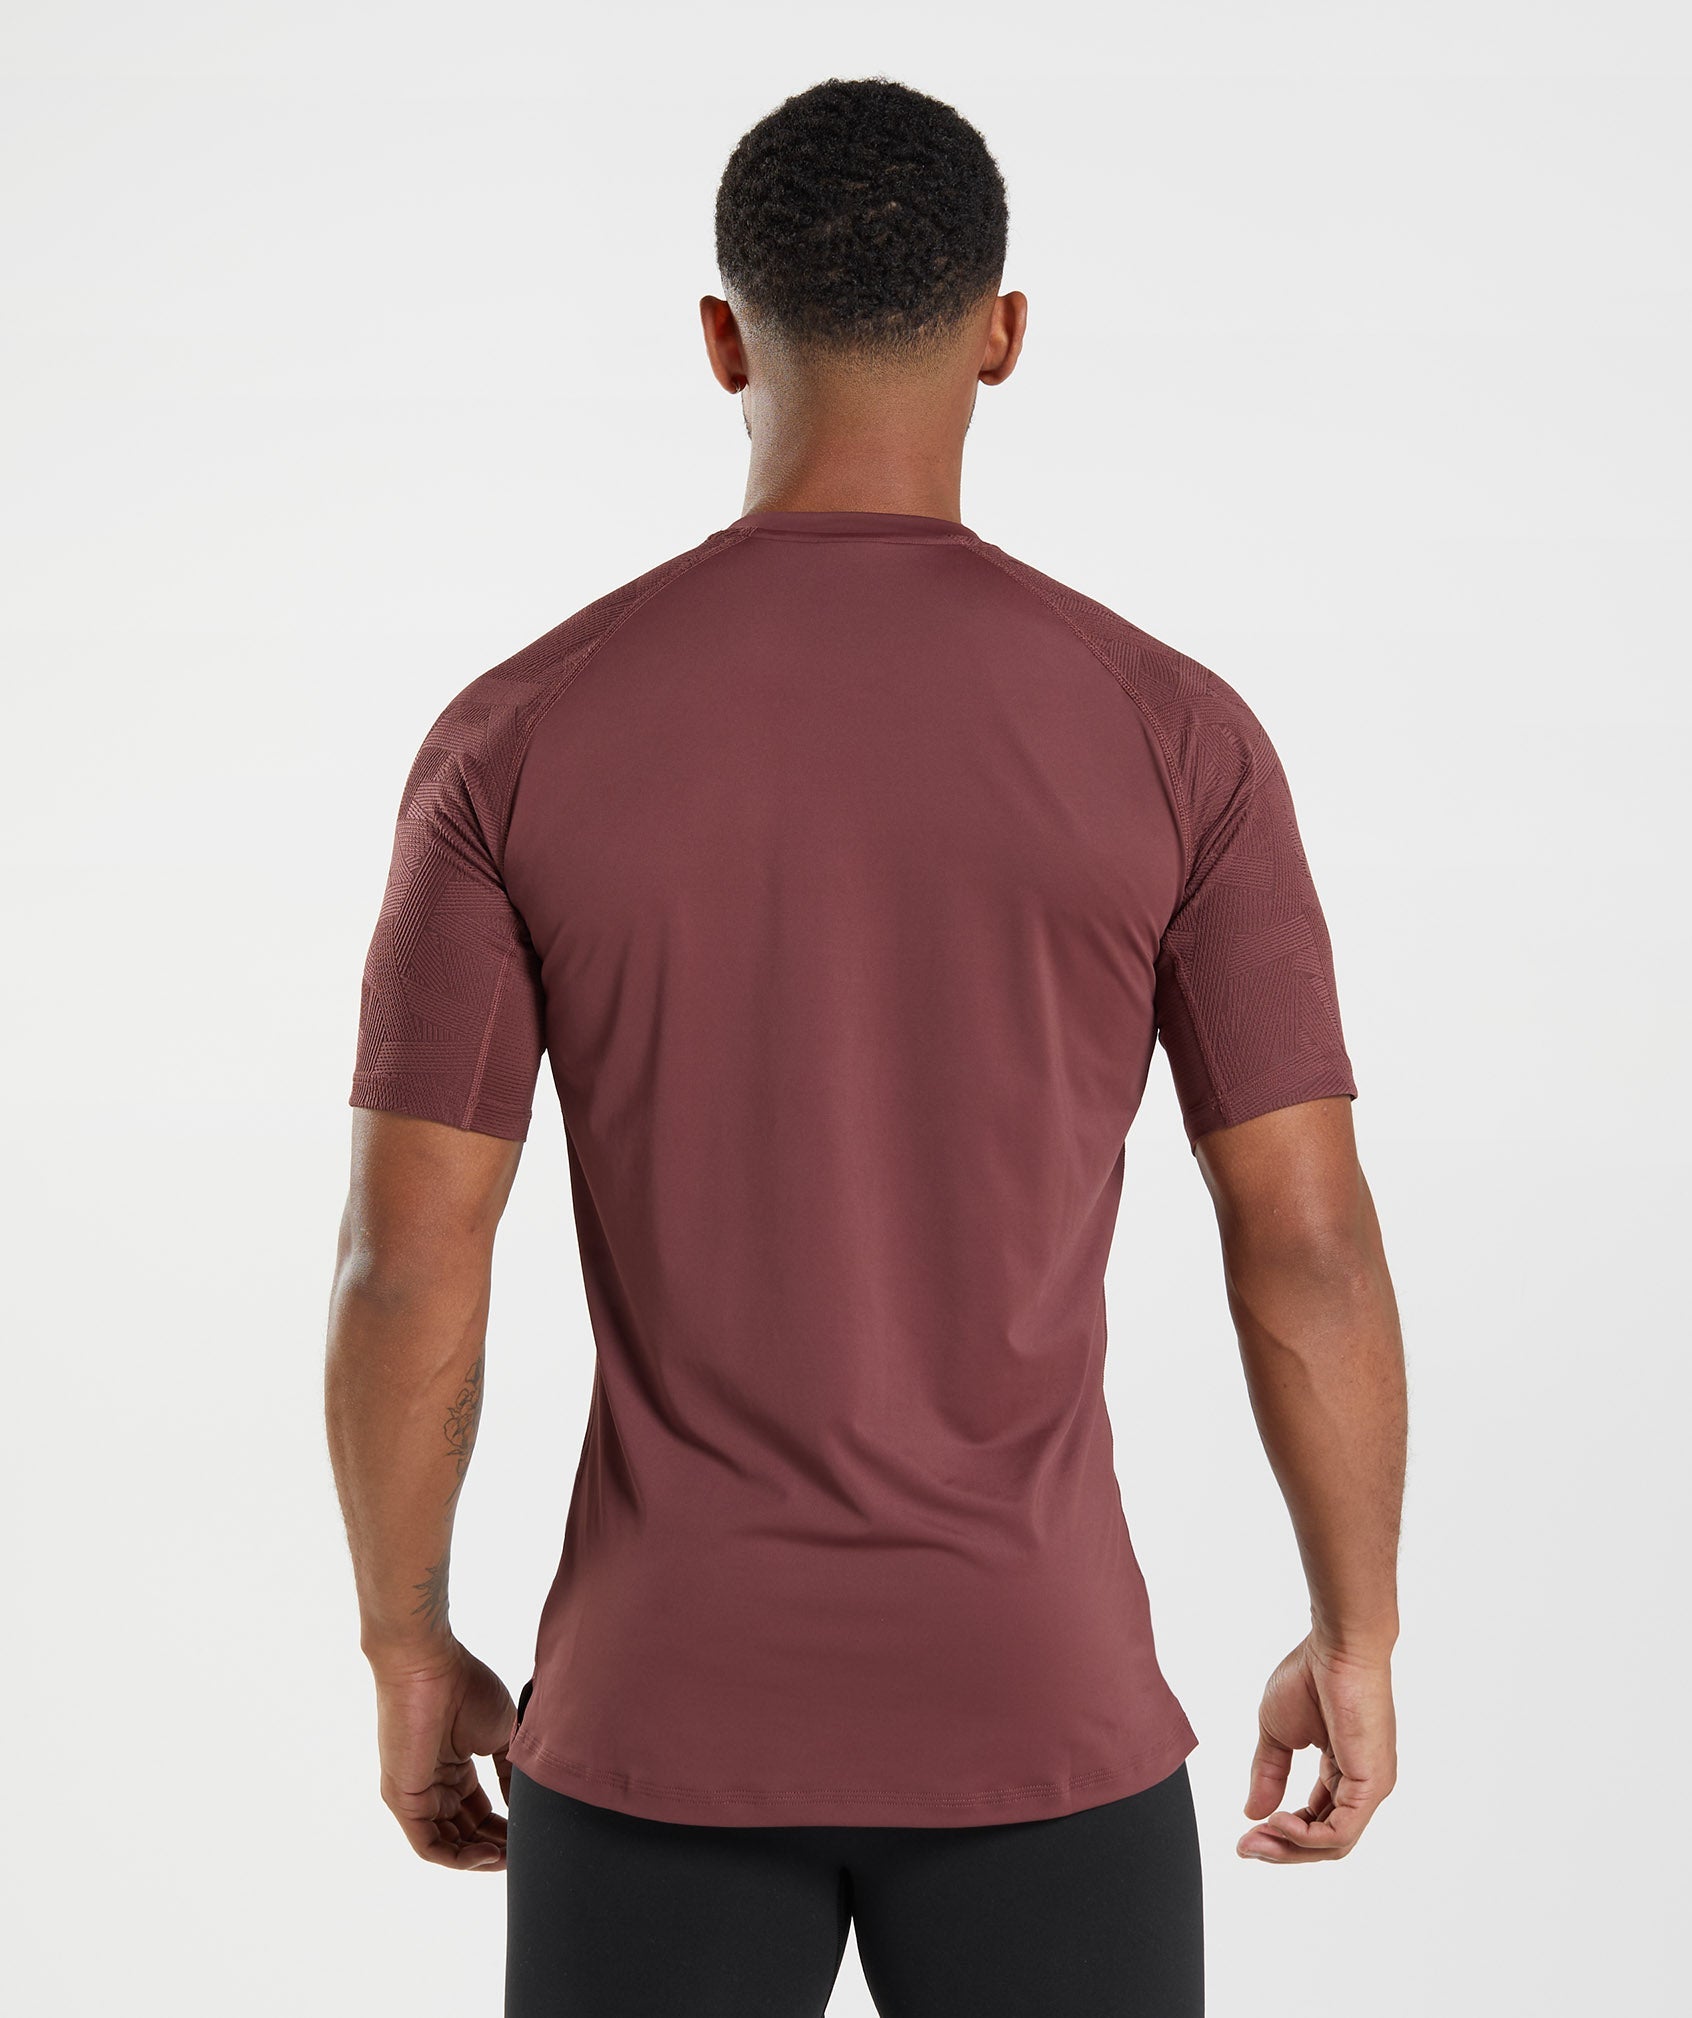 Form T-Shirt in Cherry Brown - view 2